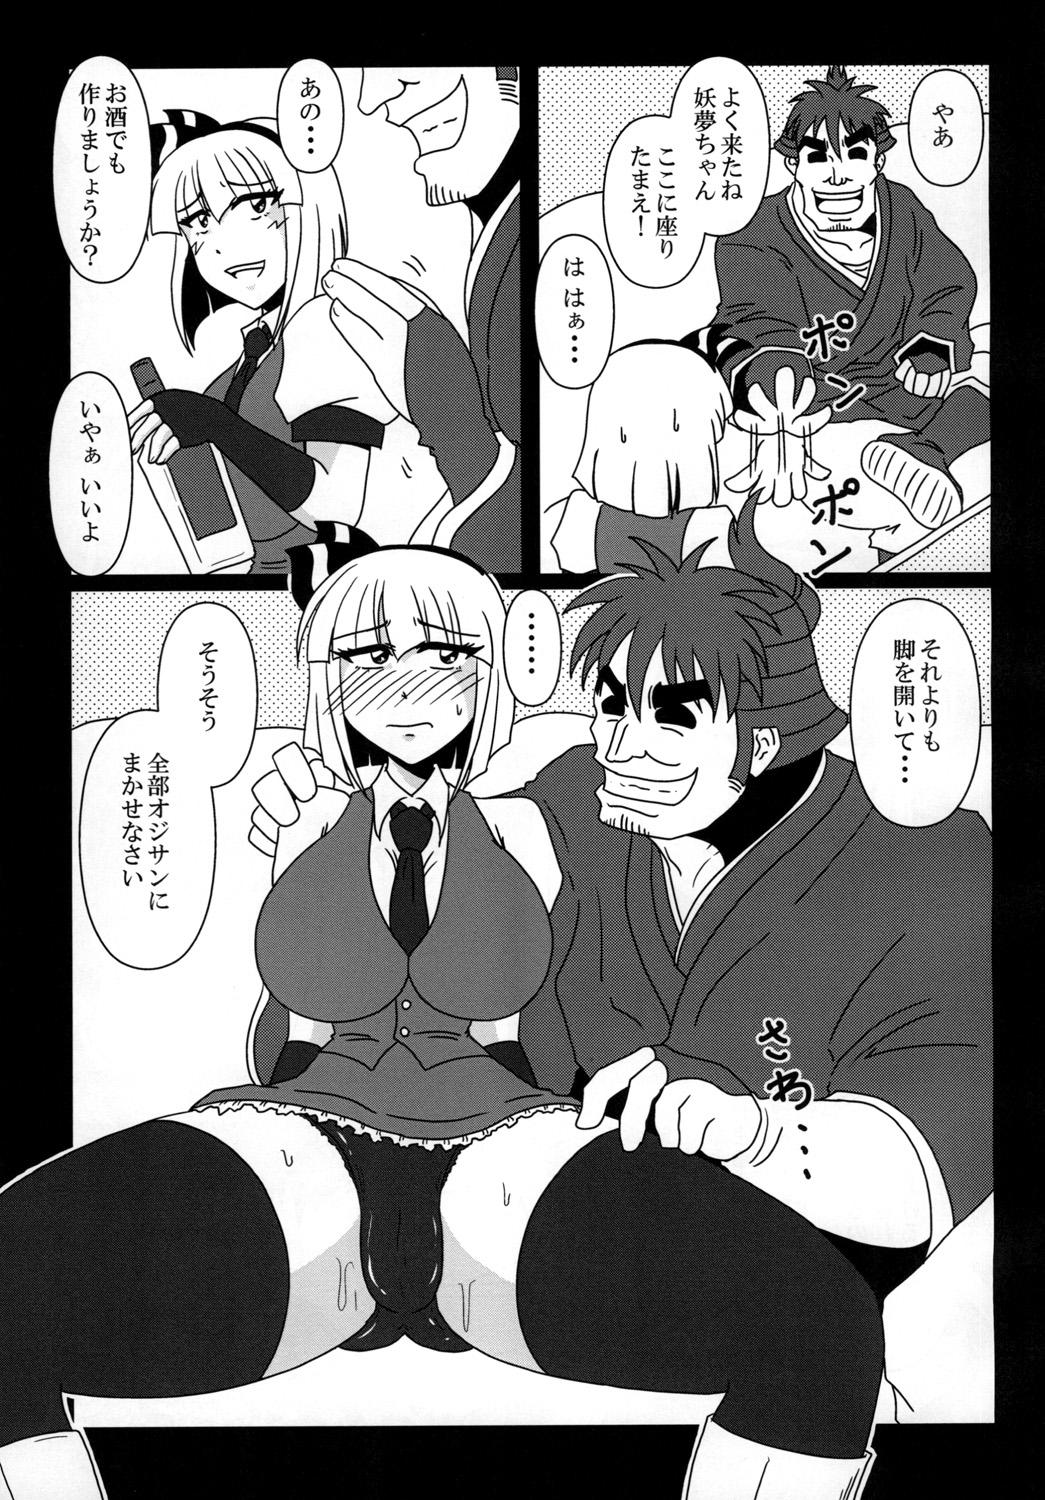 Soles 魂魄妖夢バイトやらされてます! - Touhou project Pornstar - Page 11